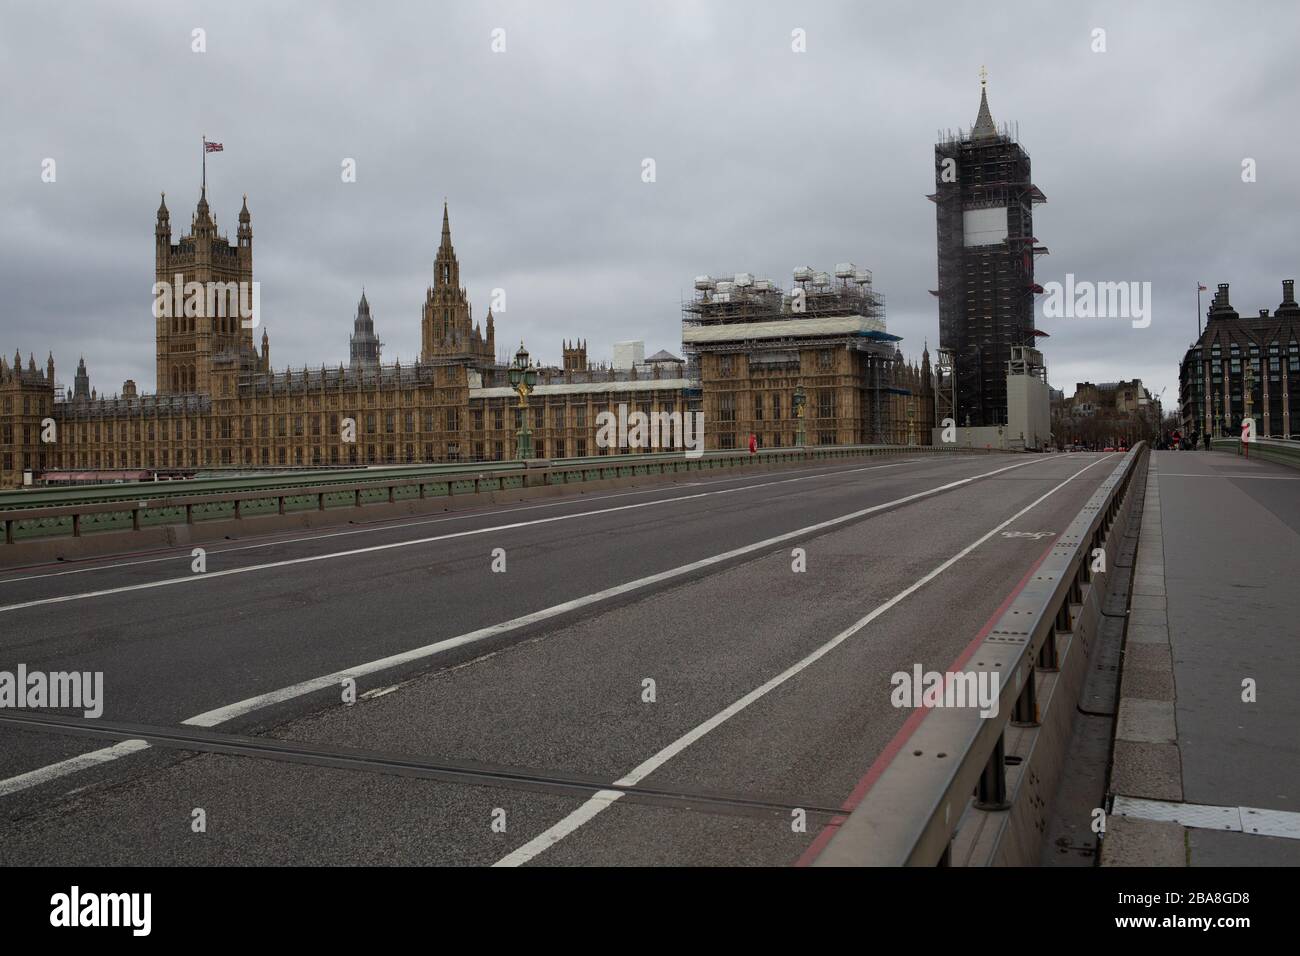 London's Parliament building seen from Westminster Bridge. Stock Photo